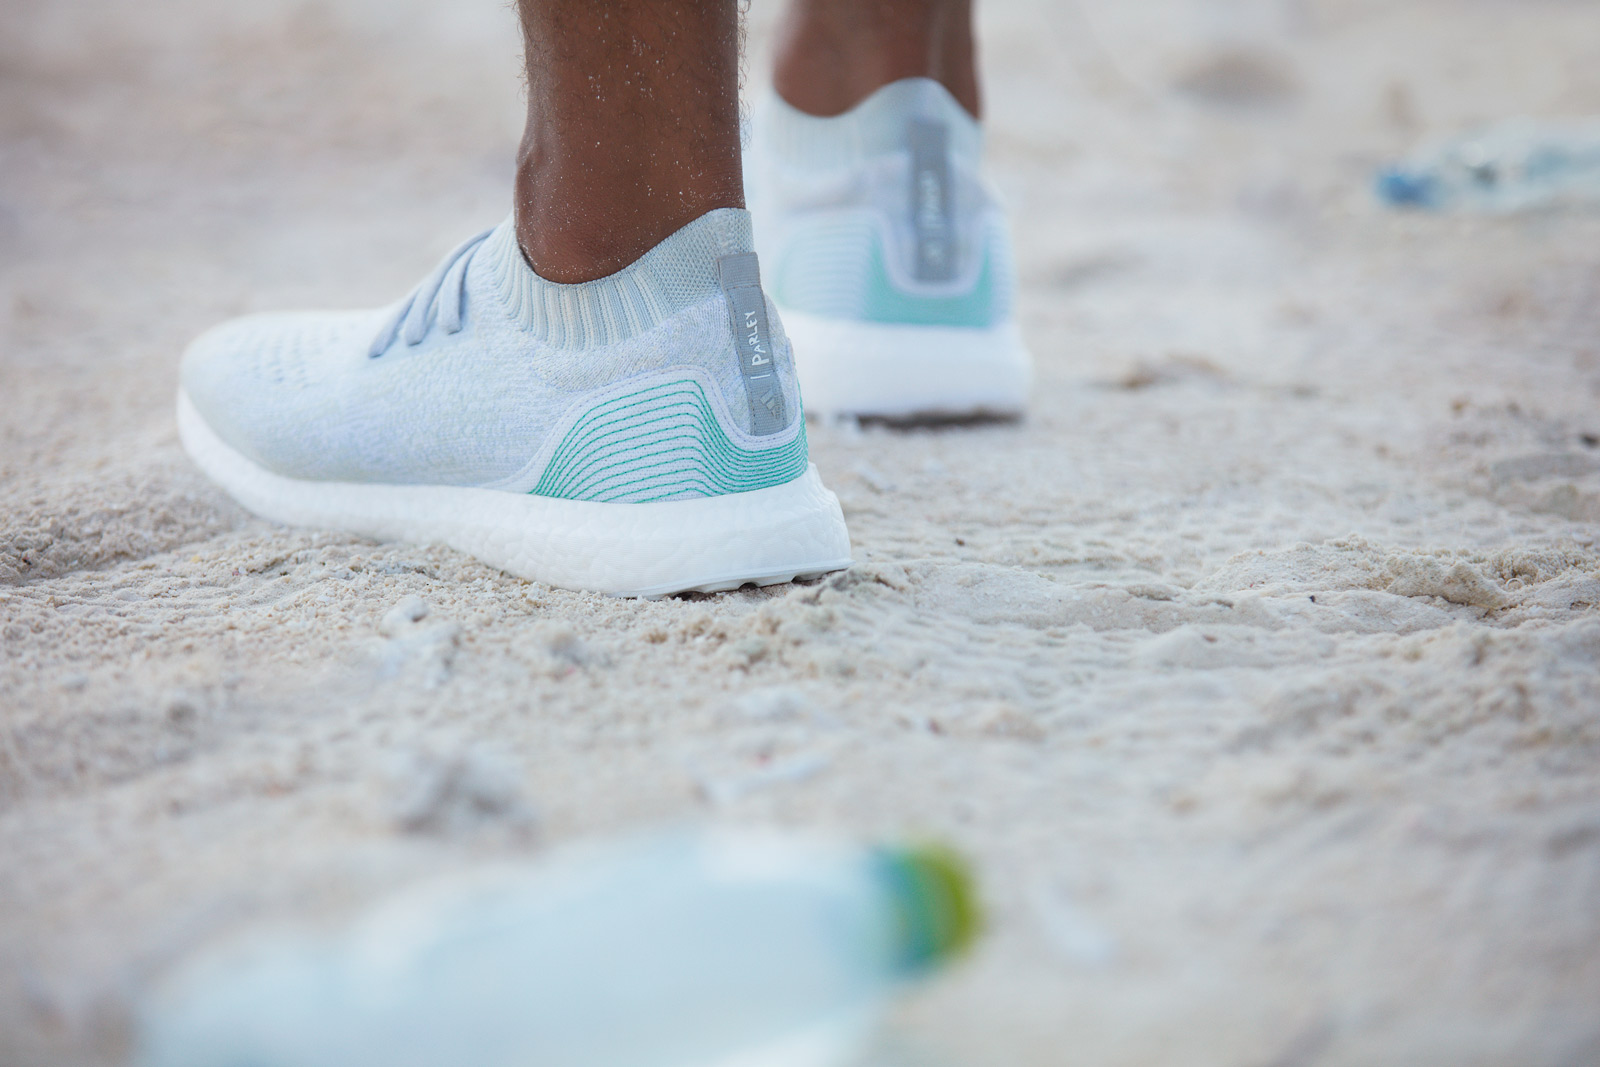 + Parley for the Hits the COOL HUNTING®